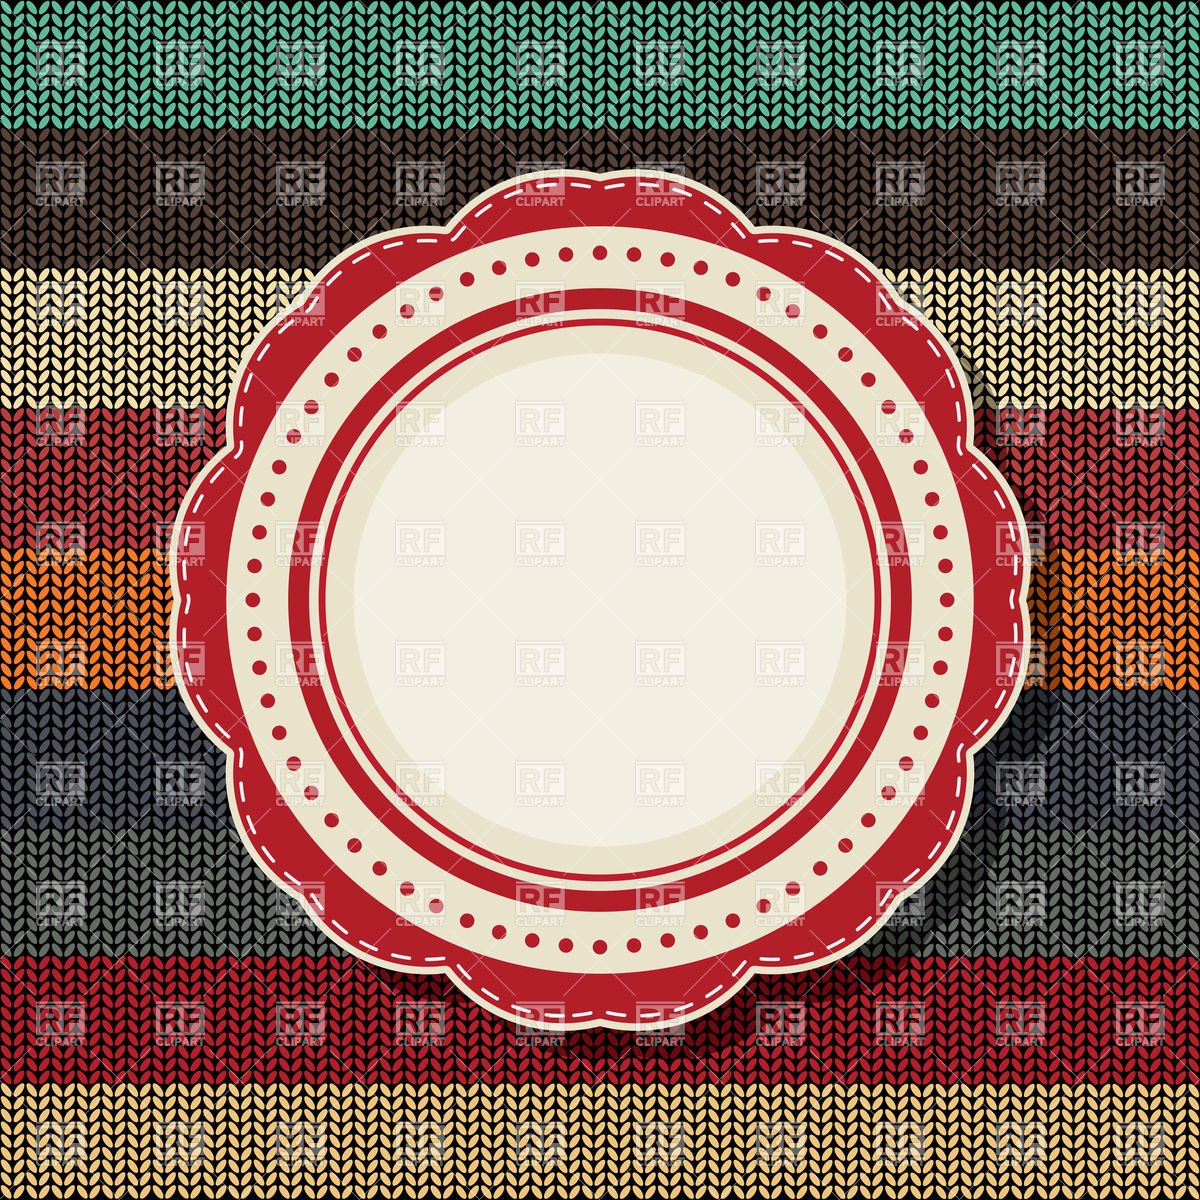 Round Vintage Label Over A Knitted Background 26842 Download Royalty